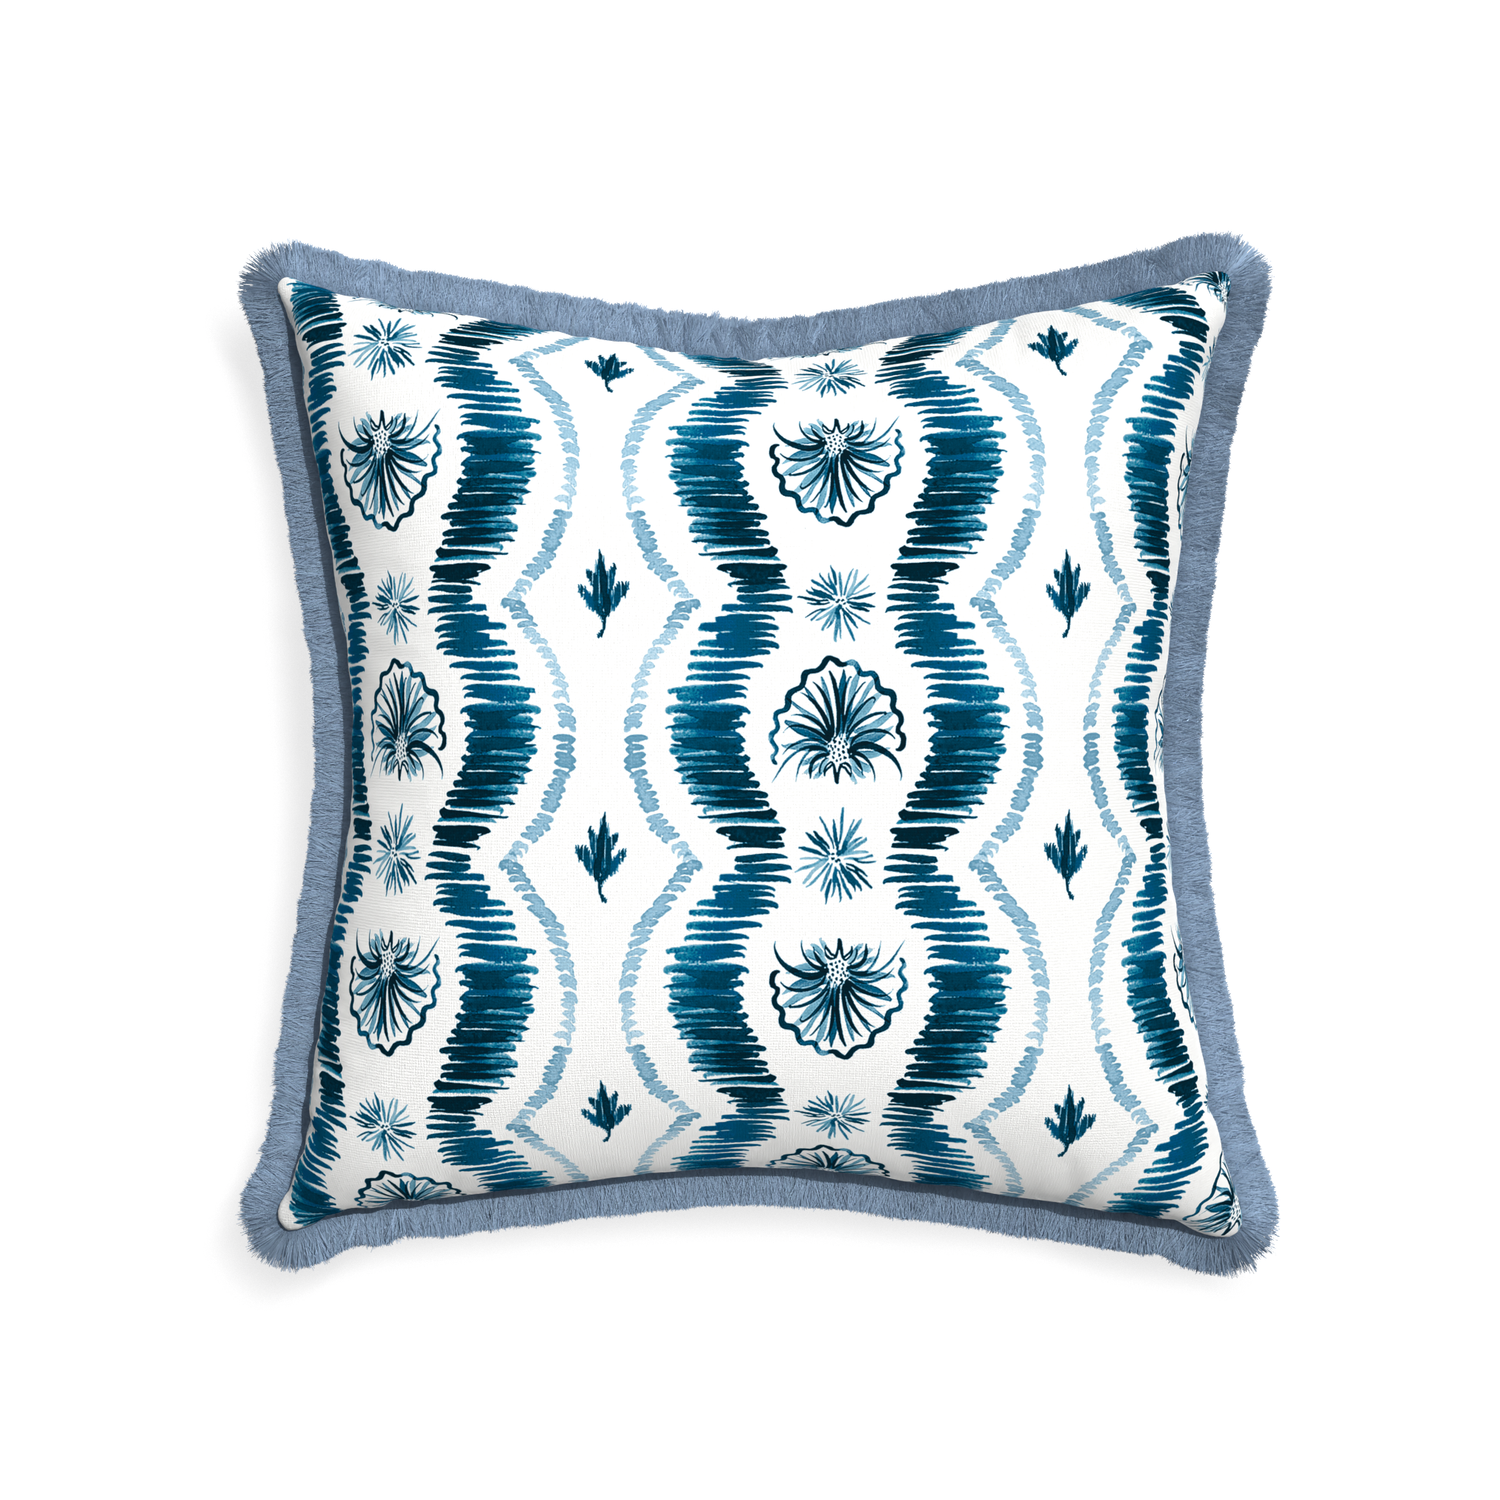 22 inch Square Blue Ikat Stripe Pillow with sky blue fringe